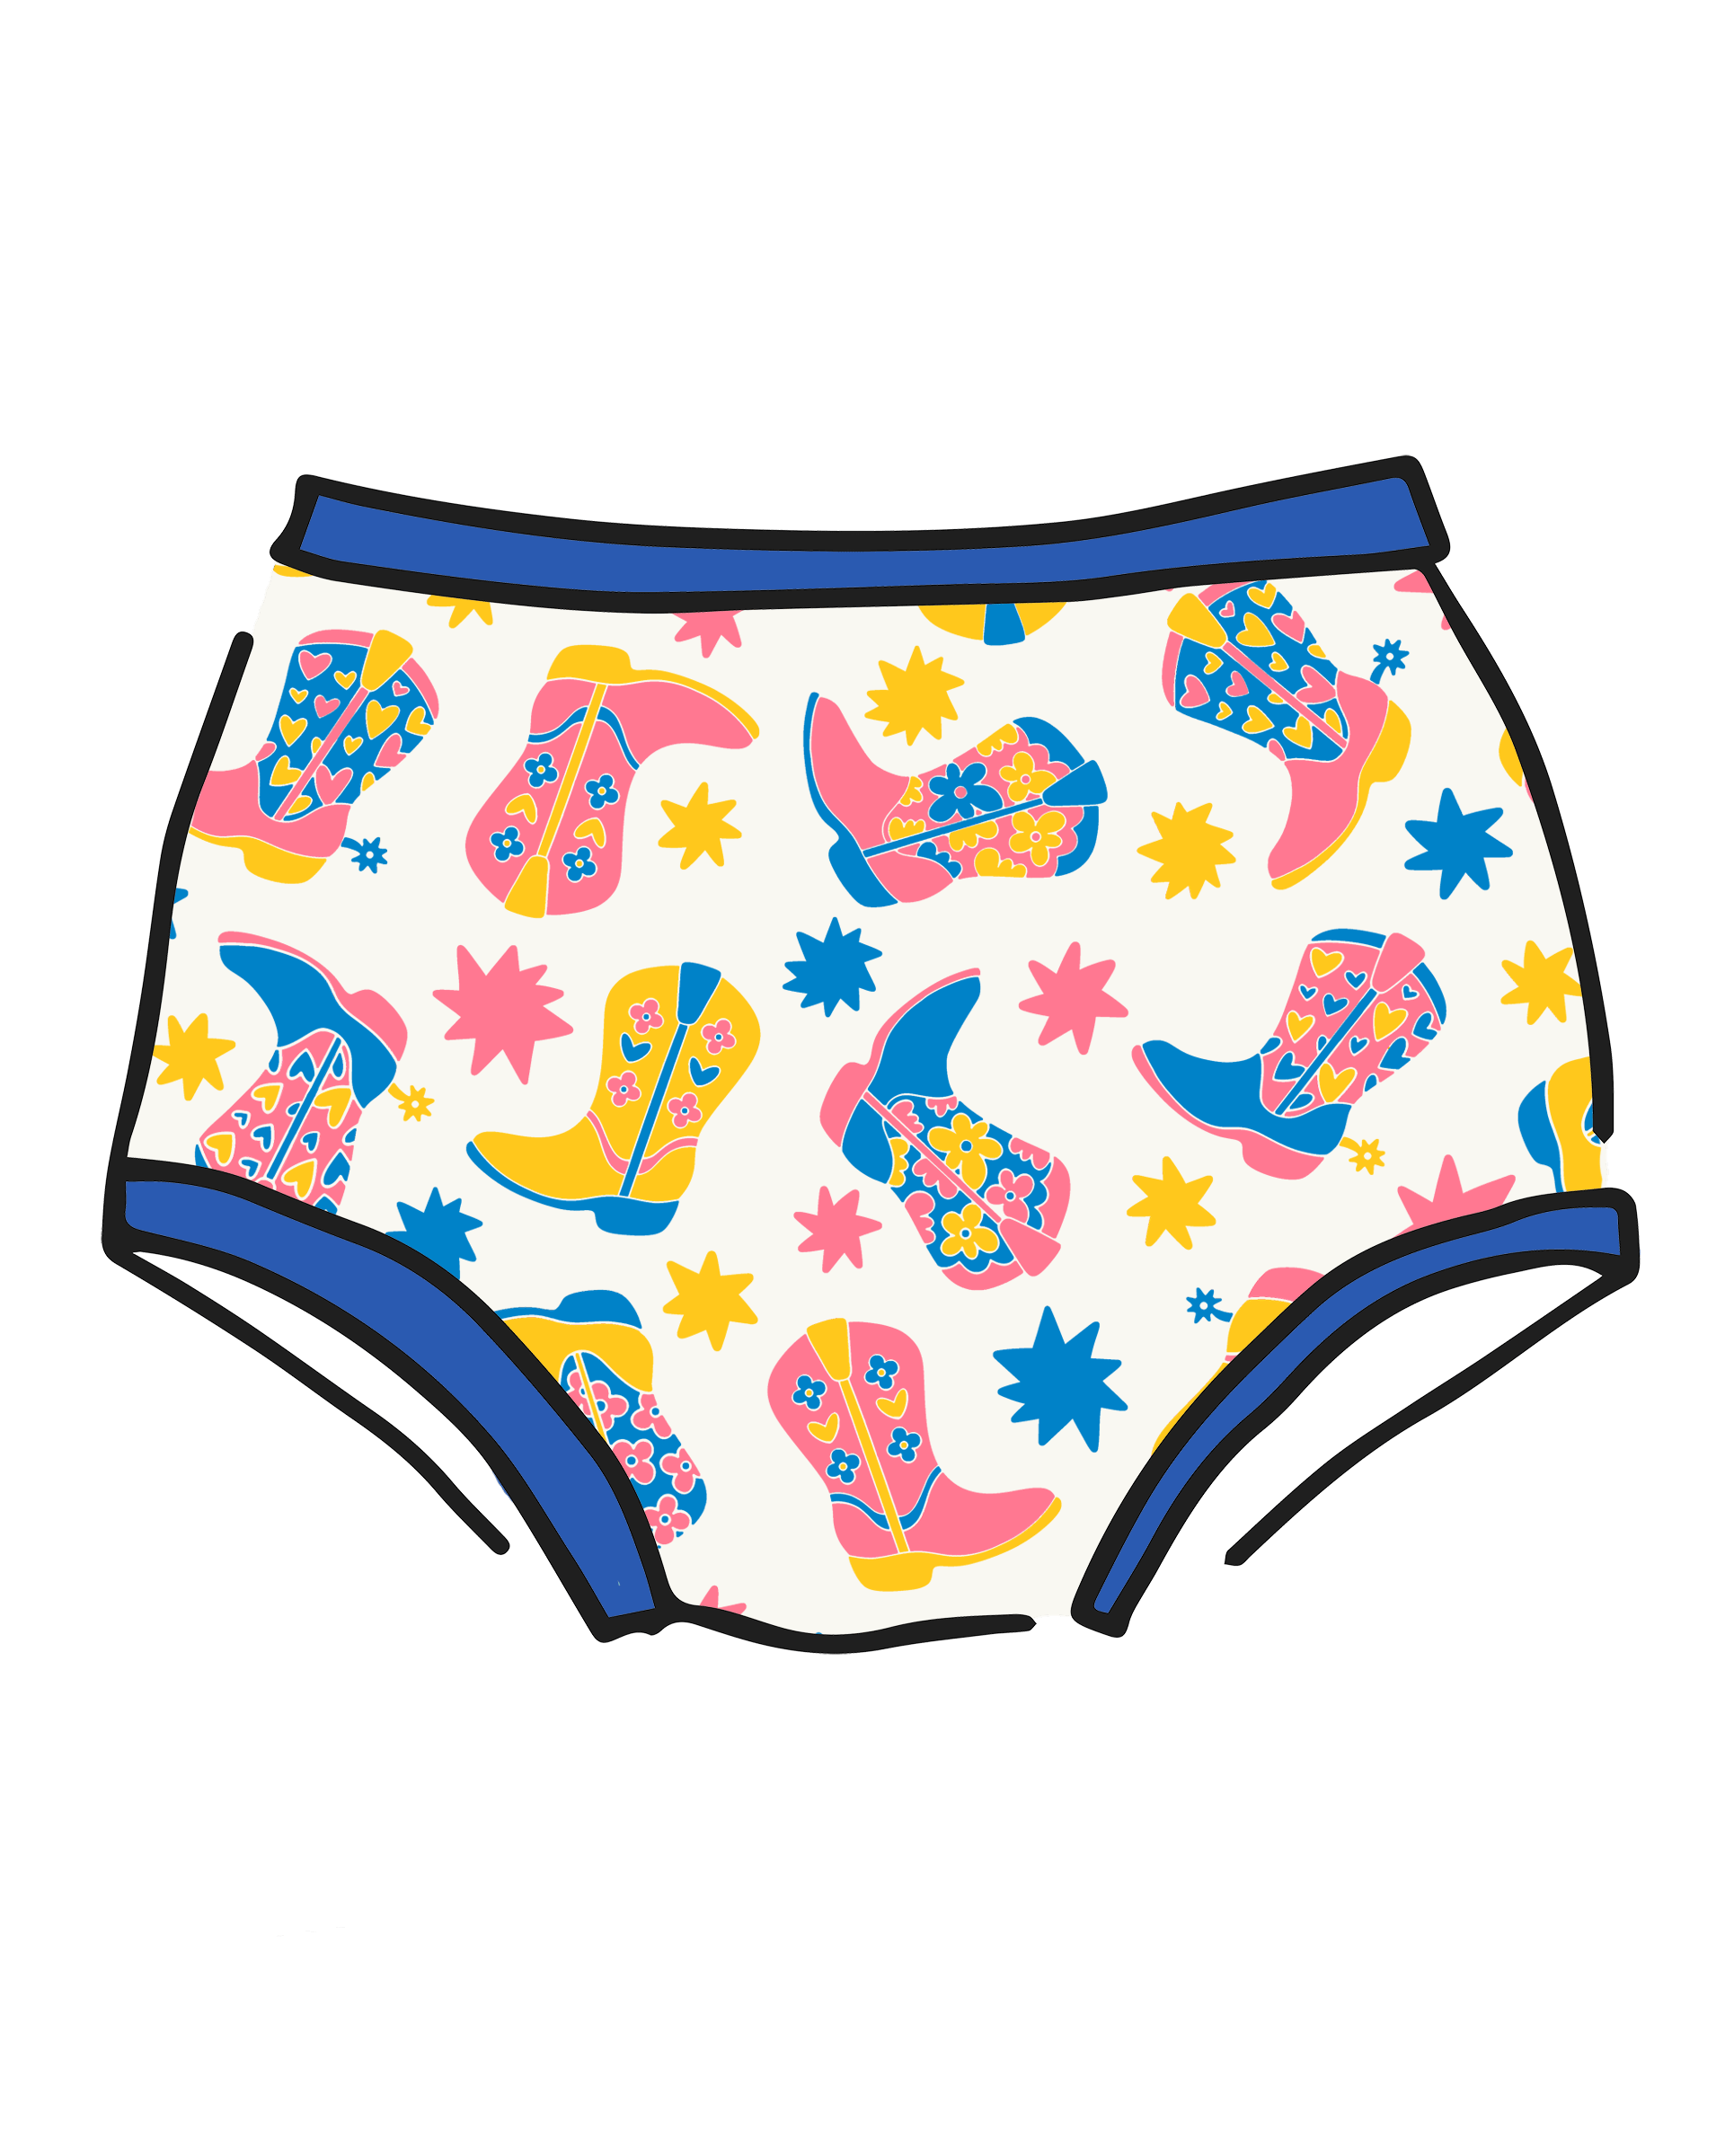 Drawing of Thunderpants Original style underwear in Boot Scootin' print.